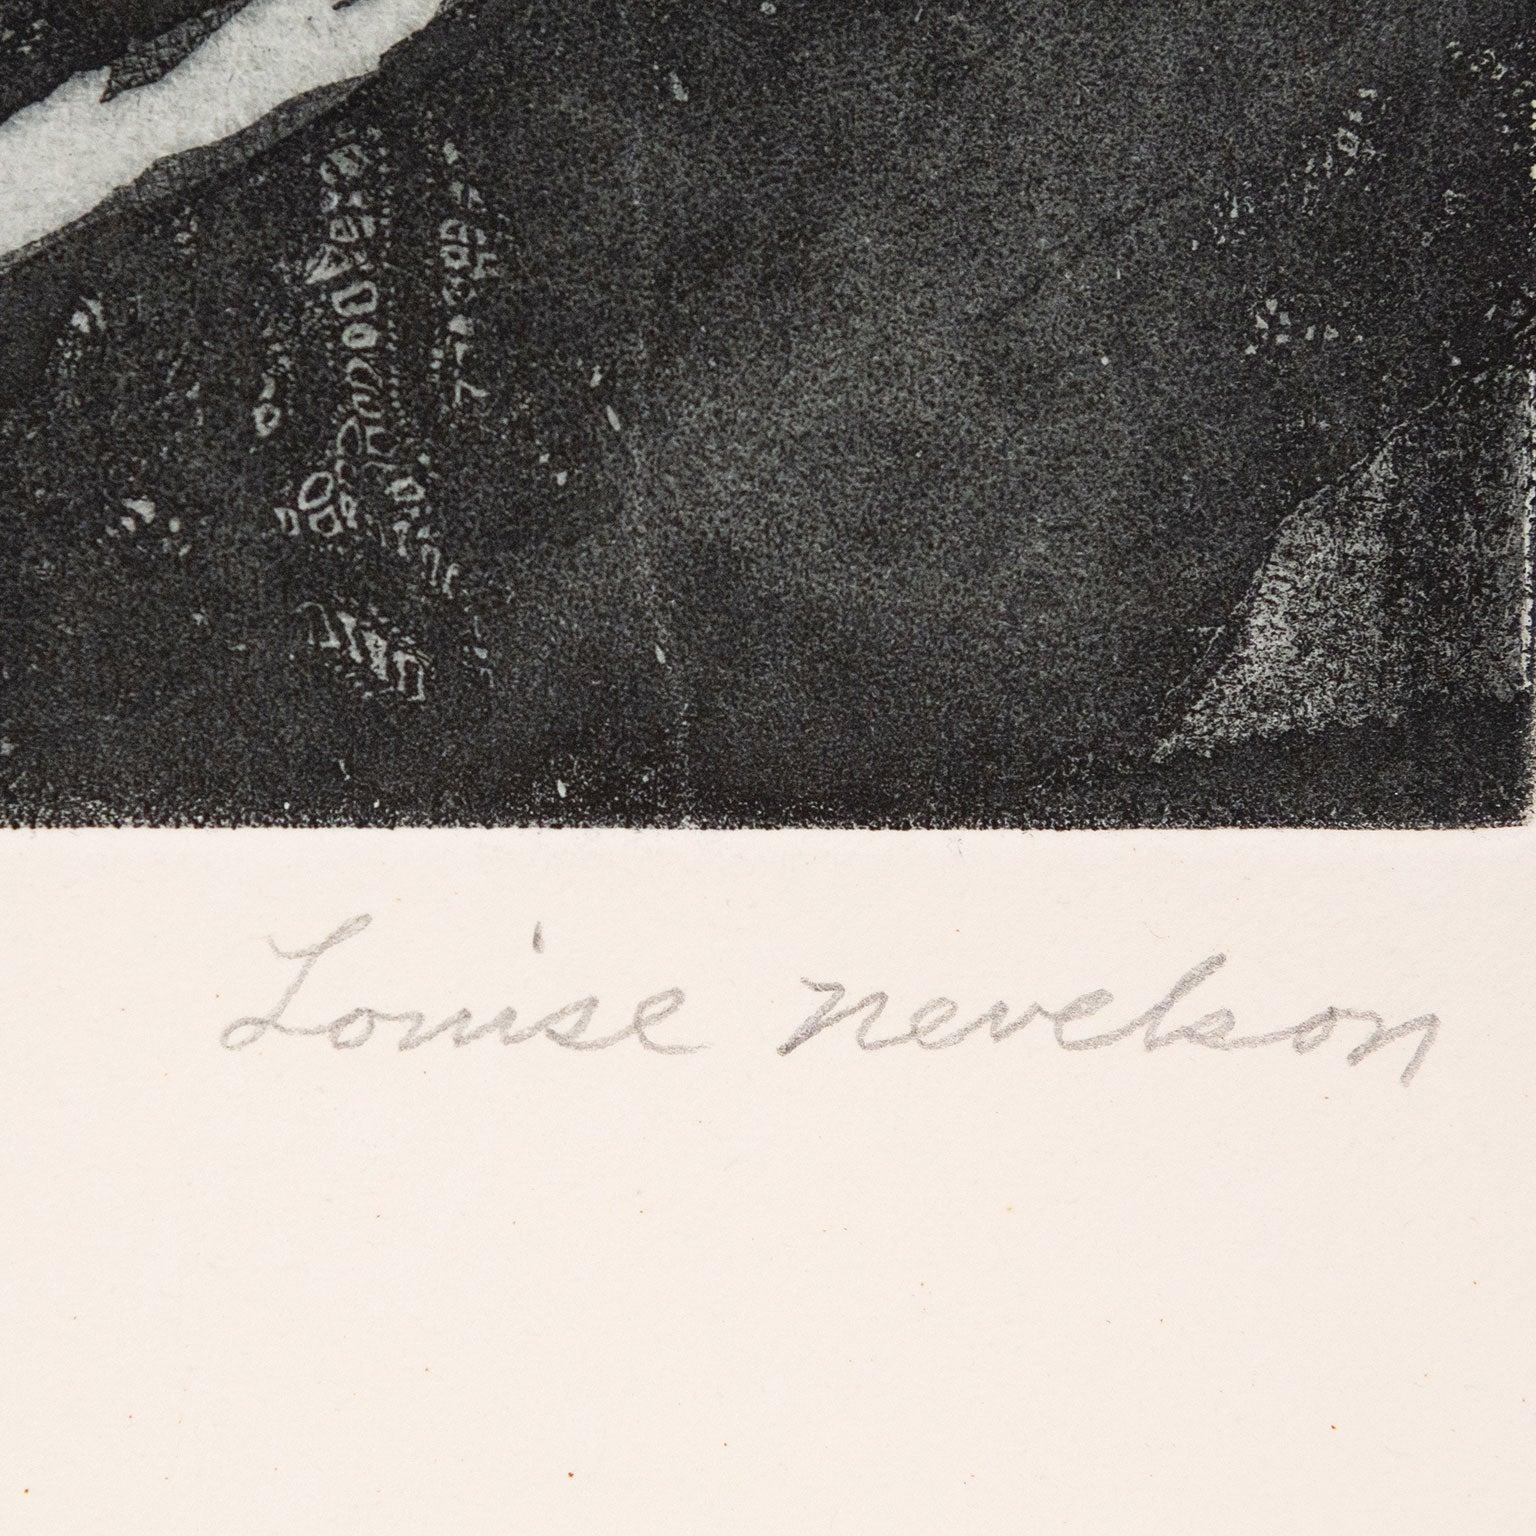 As always, Caviar20 is thrilled to present the esteemed work of Louise Nevelson - one of the most revered and unique artists of the 20th century.

Although Nevelson is best known for her work as a sculptor, like many of her American contemporaries,